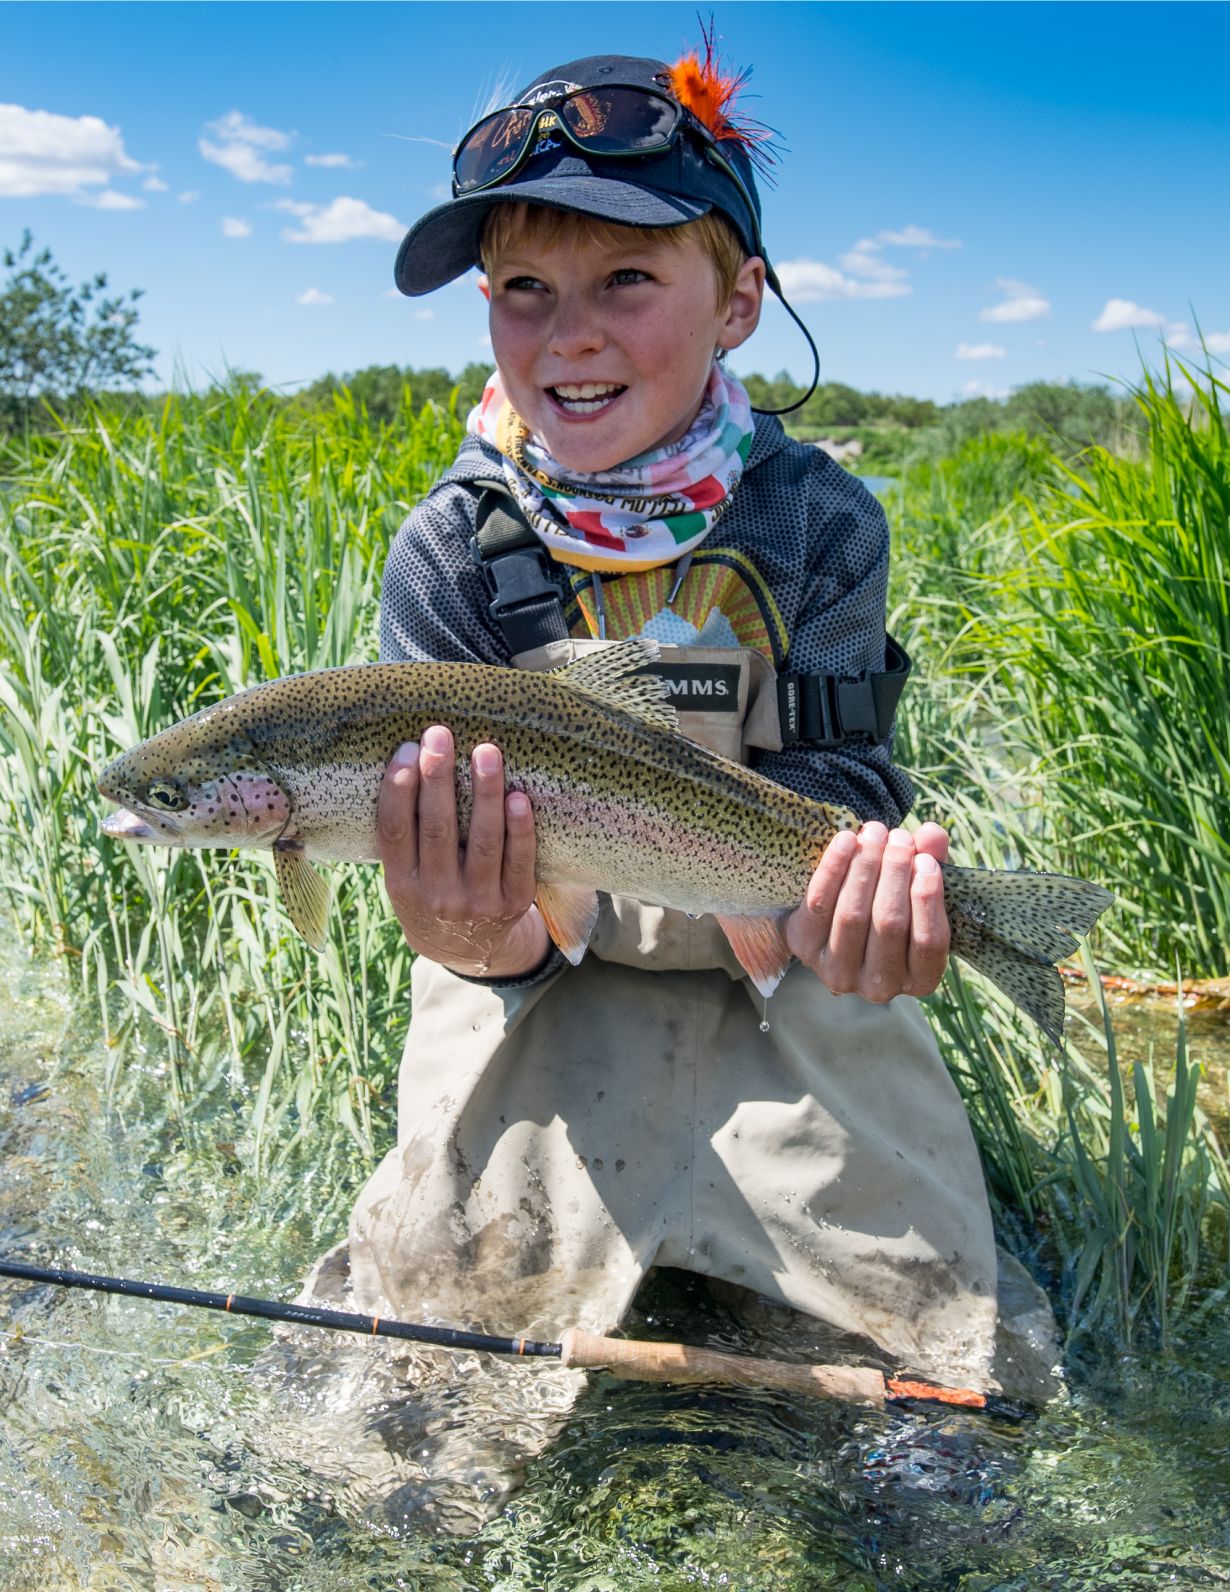 Introducing Your Kids to Fly Fishing: Doing it Right